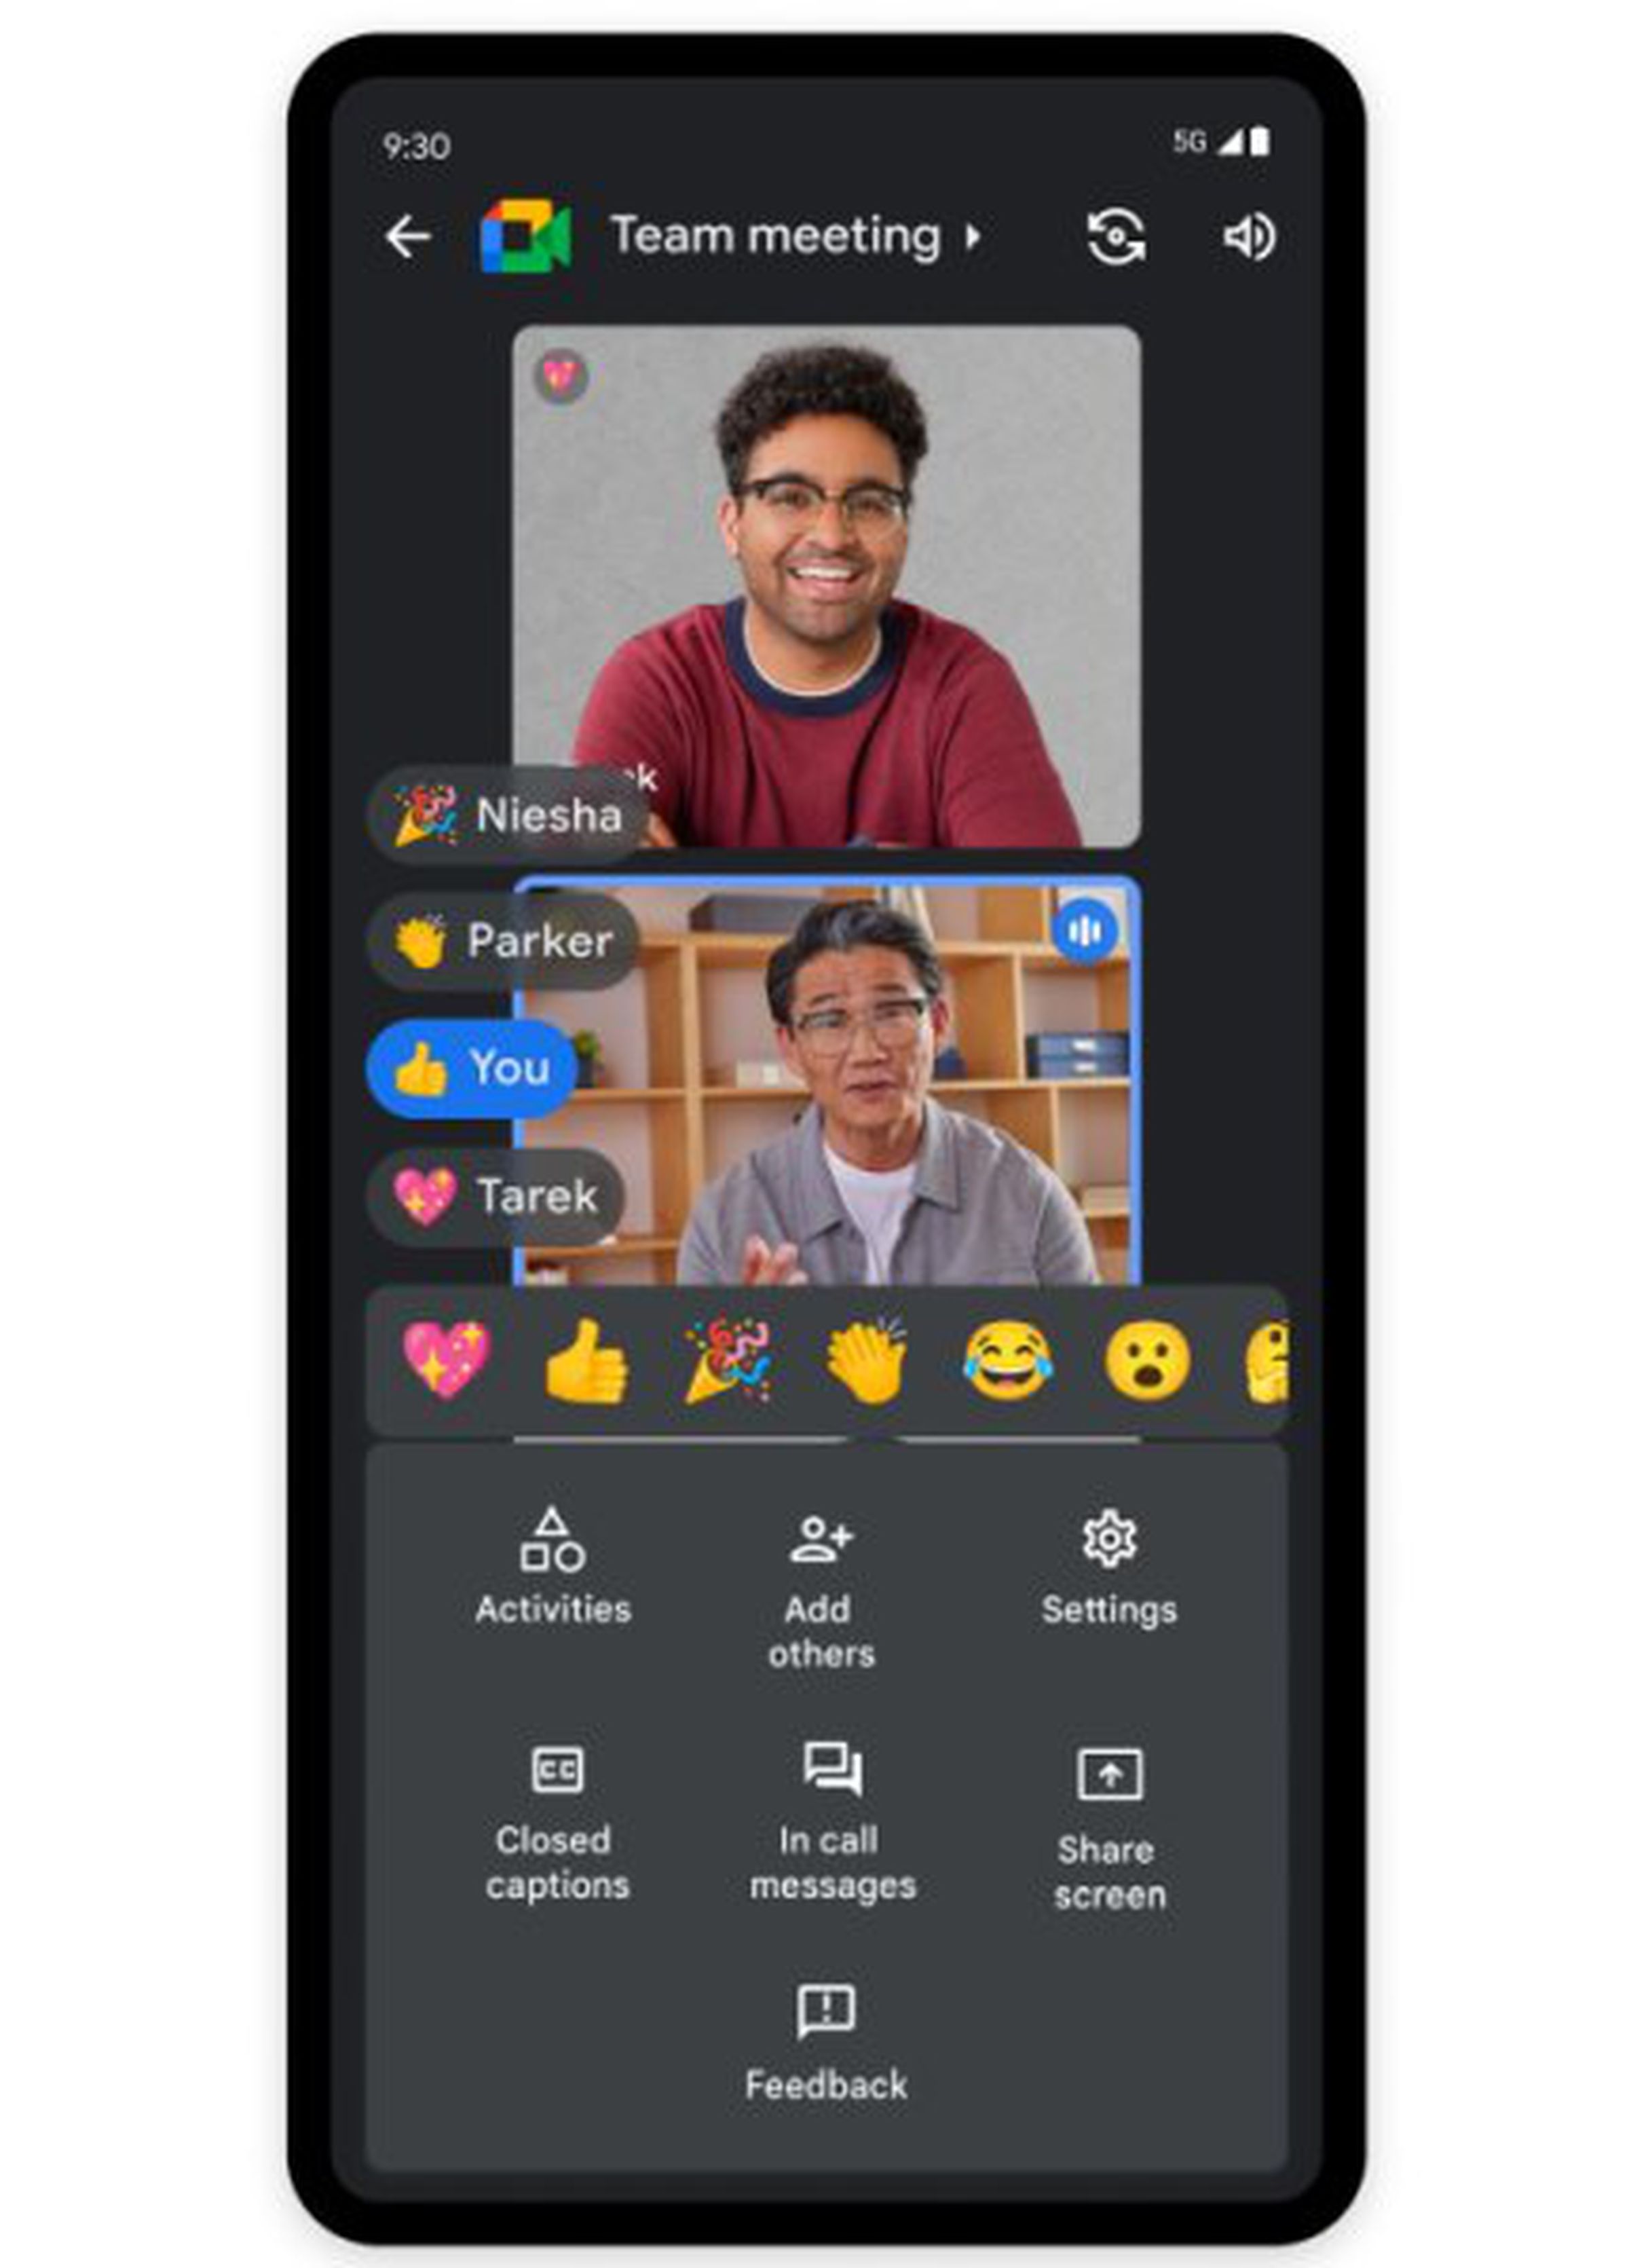 Picture shows a simulated phone screen with two people in a Google Meet video chat conversation, with several emoji reactions available to choose from including a thumbs up, sparkly heart, or clap.